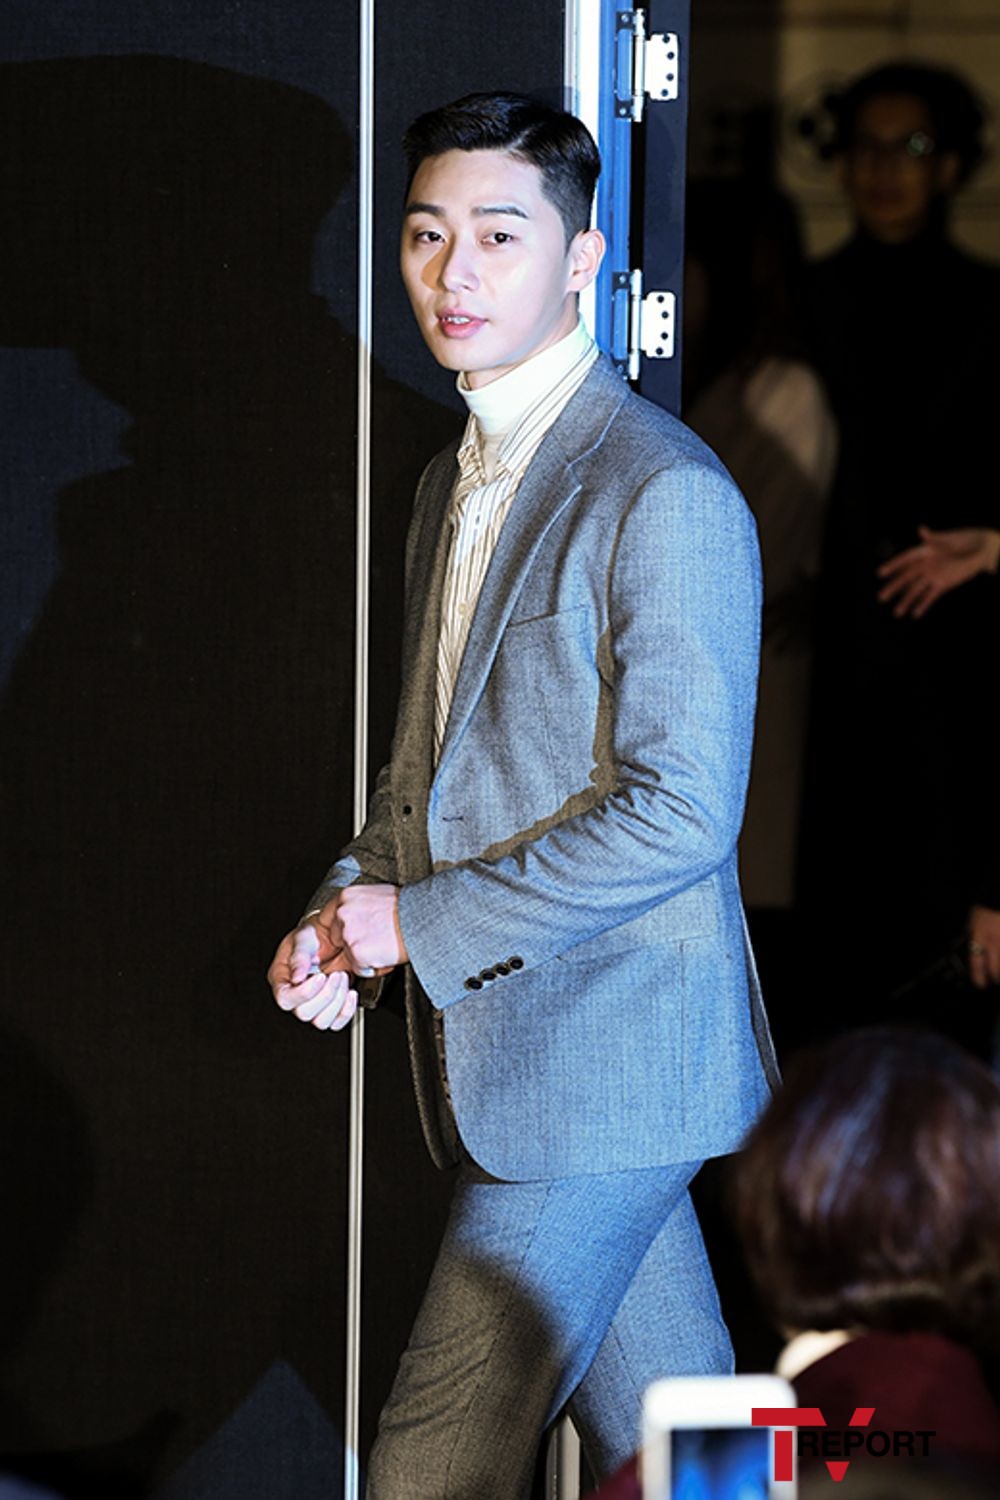 Actor Park Seo-joon is attending the ceremony for the delivery of the fashion company Shinseong Trade Fever of On air Donation held at the Basrak Hall in Seoul, Taepyeong-ro, Jung-gu, Seoul on the morning of the 15th.Shin Sung-sang pledged the Donation of Fever of On air worth about 150 million won at the ceremony. On air delivered to 29 food bank market centers in 25 boroughs through the Seoul Metropolitan Food Bank Center, which receives food and household goods with the Seoul Metropolitan Government and delivers them to difficult neighbors. .